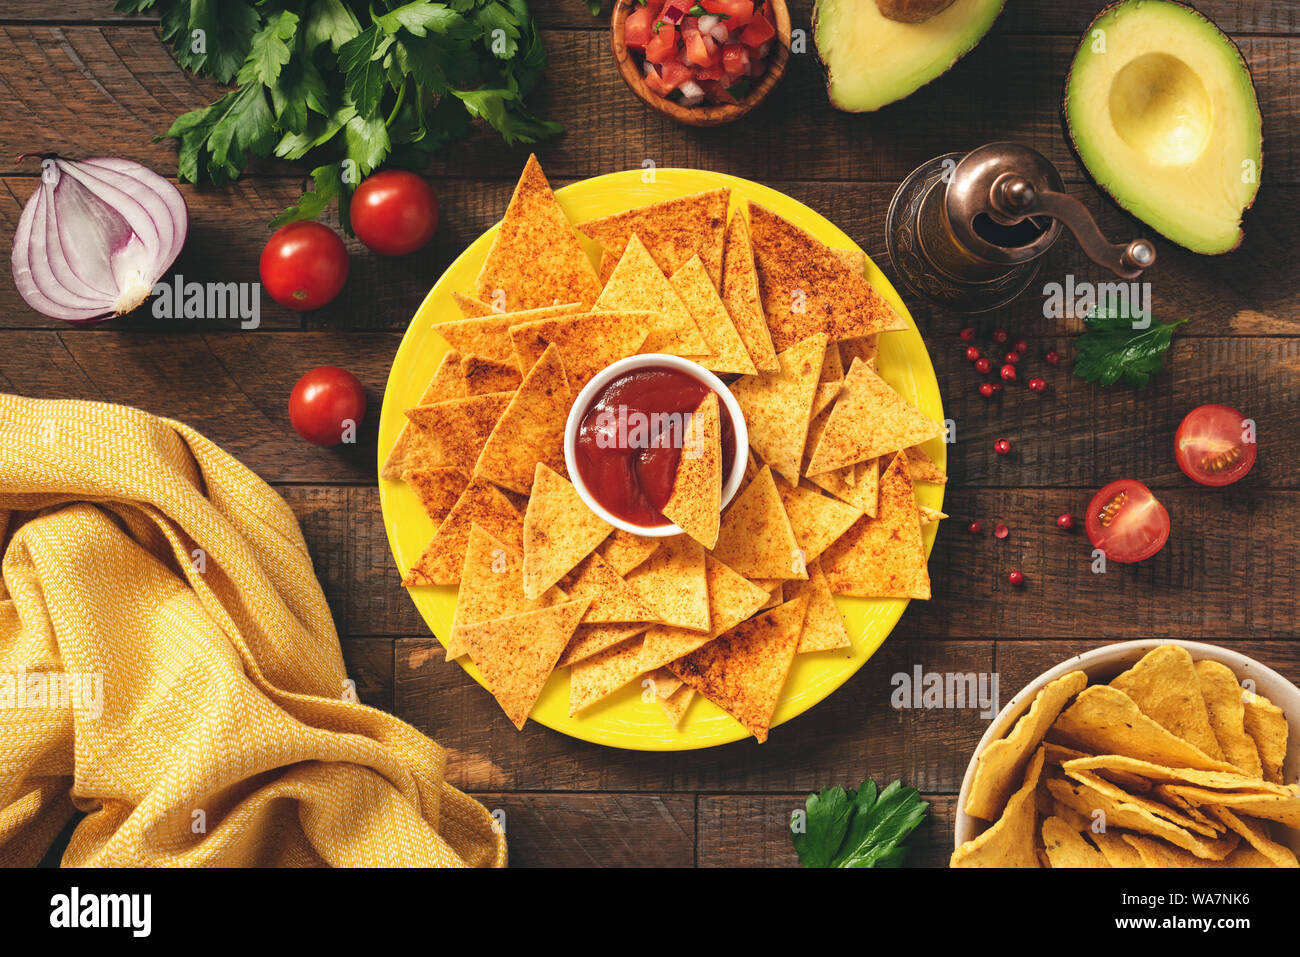 Corn tortilla chips Nachos with tomato sauce on plate. Tex mex appetizer or snack on wooden background. Top view Stock Photo